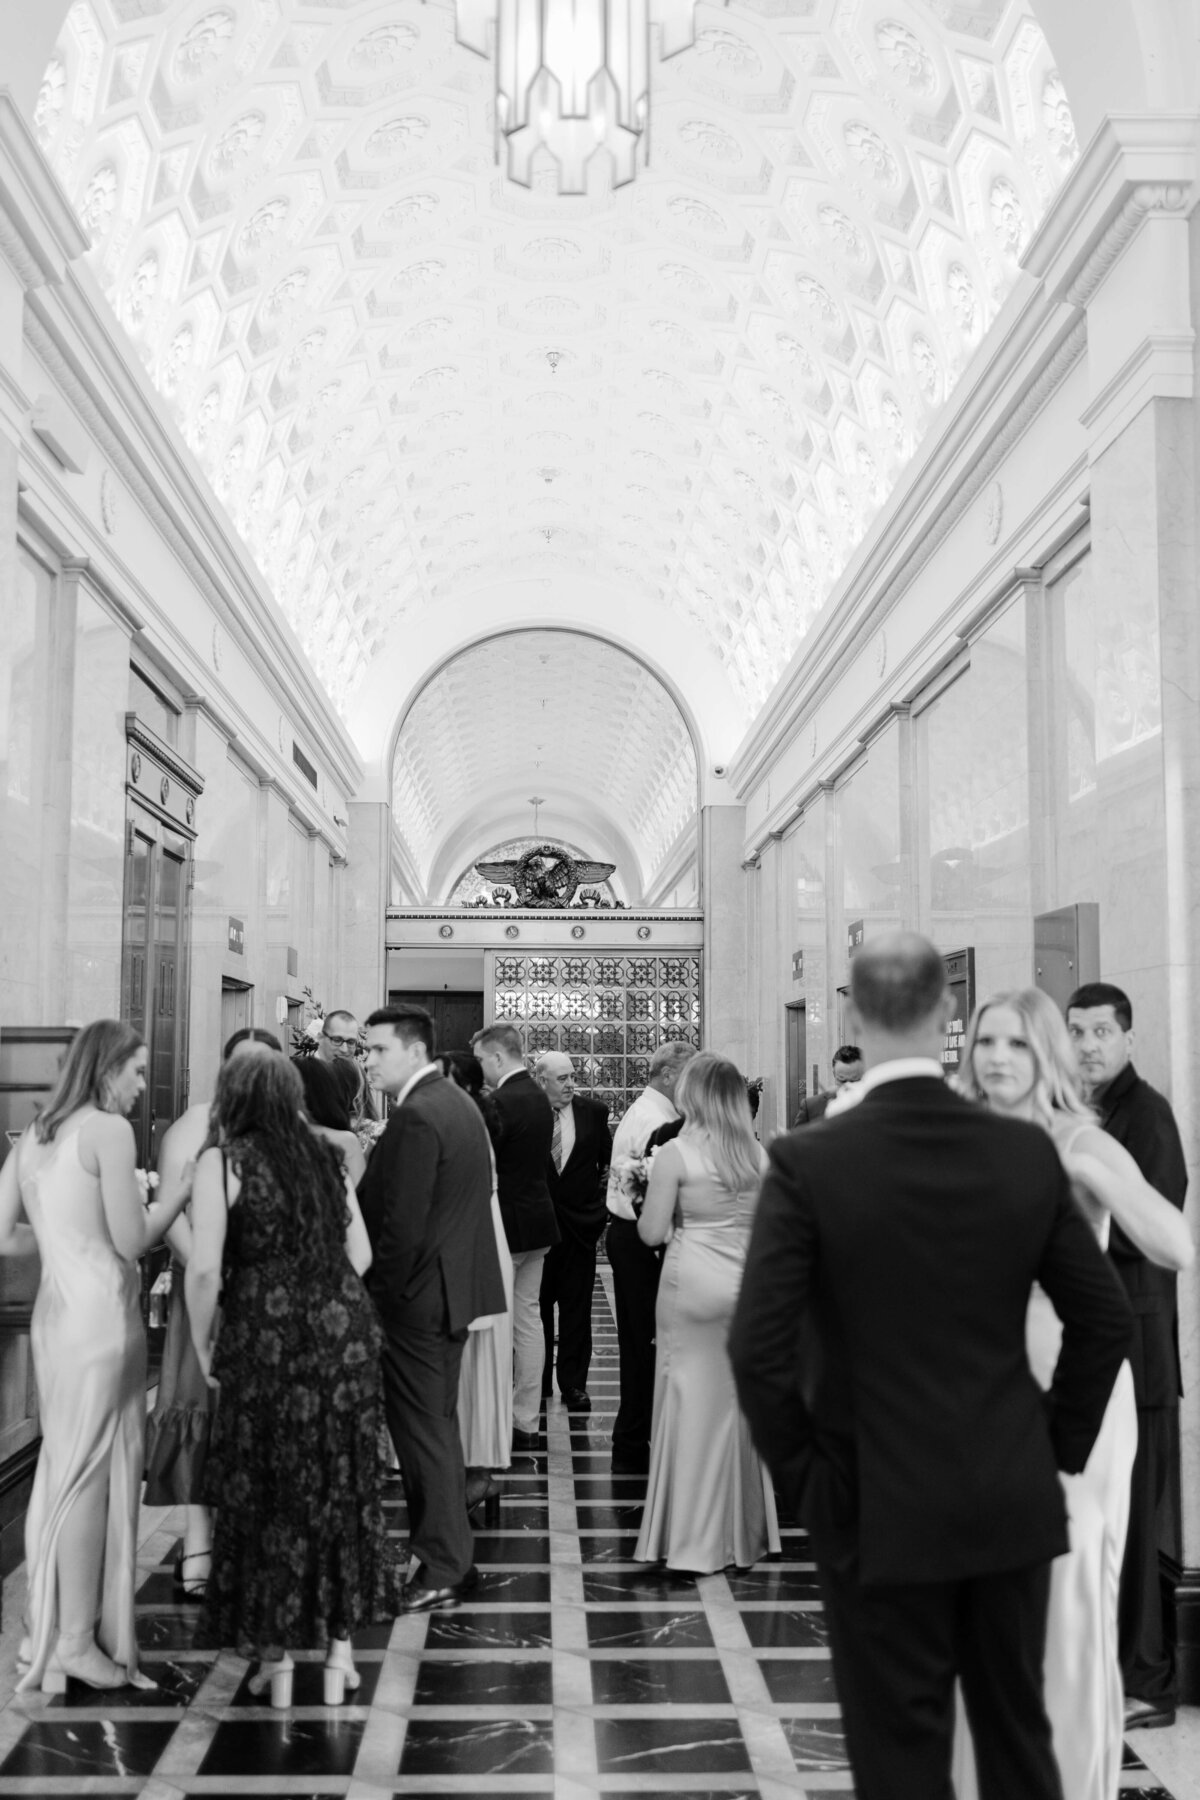 A wedding party mingle in the vault of the Riggs Hotel DC.